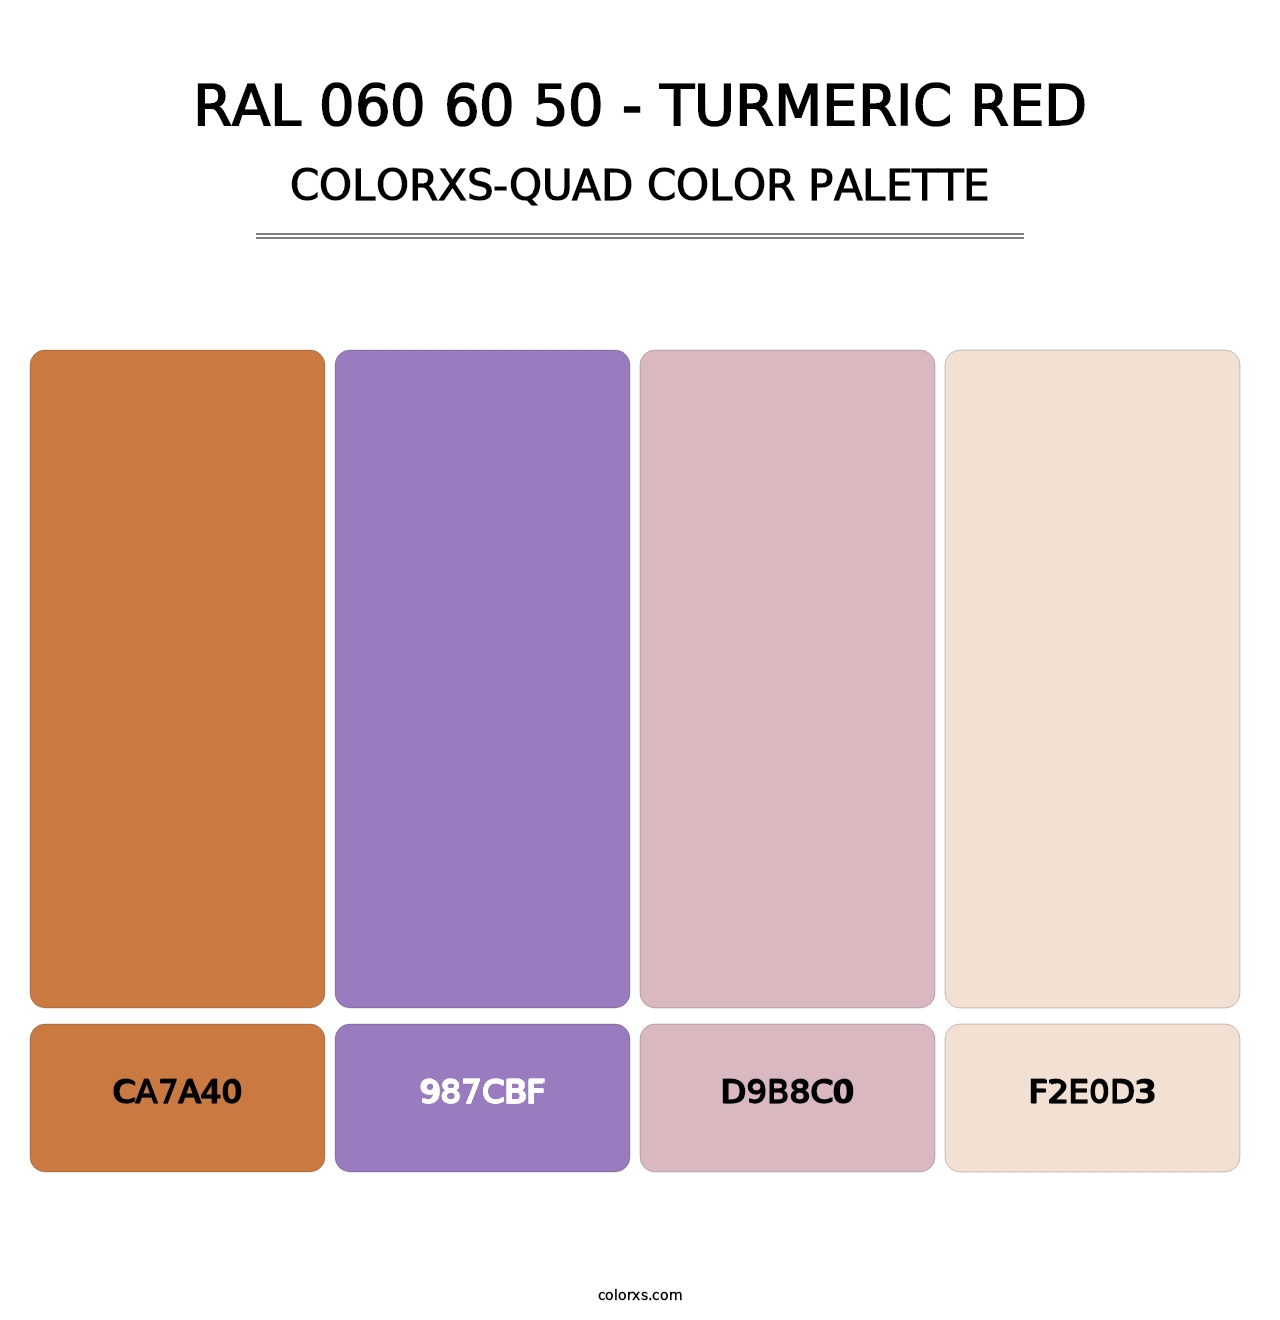 RAL 060 60 50 - Turmeric Red - Colorxs Quad Palette